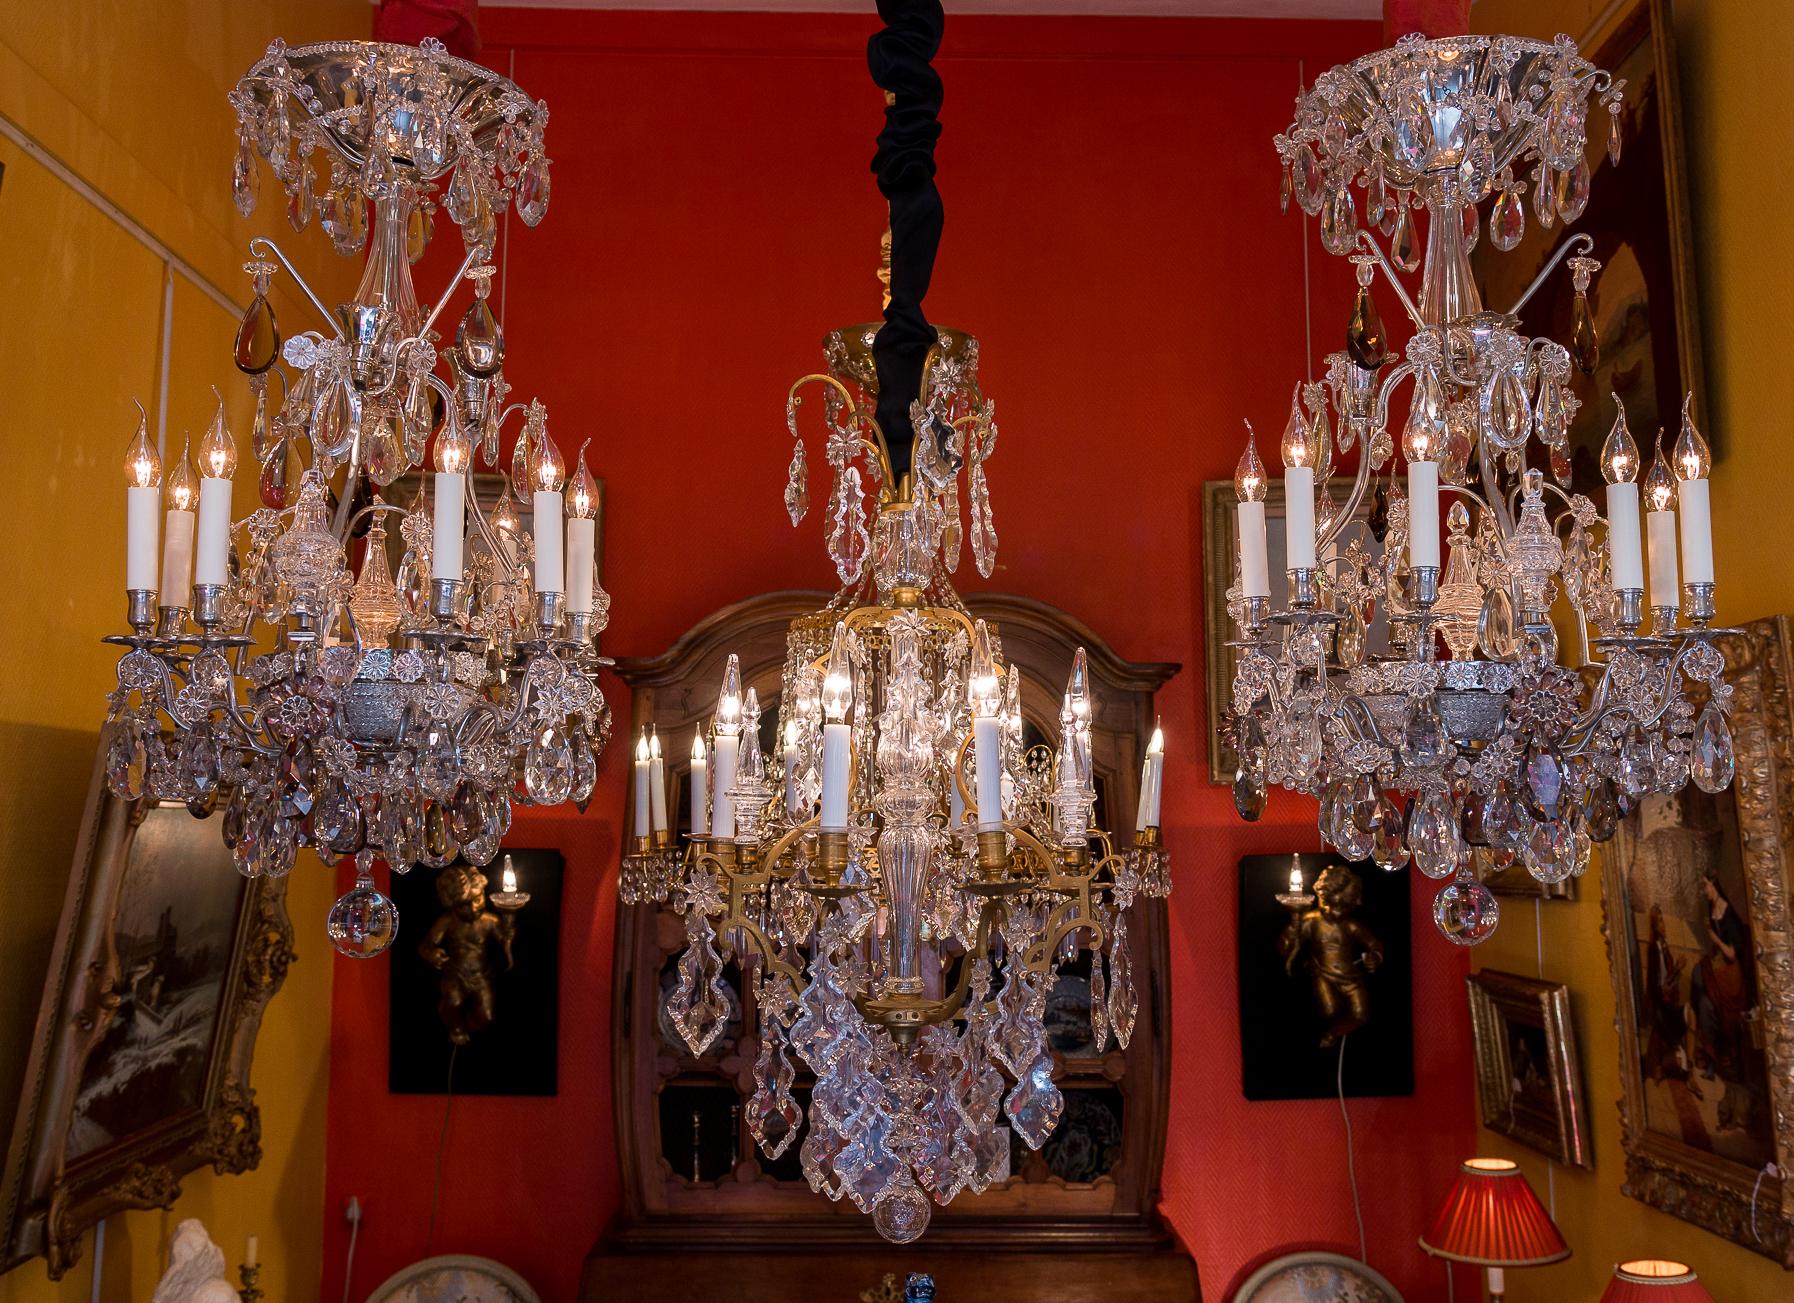 French pair of silver plate and cut crystal chandeliers, attributed to Baguès & Baccarat for the crystals, circa 1880

Amazing, rare, elegant and ornamental silver plate pair of French chandeliers with nine elegantly scrolled arm lights and six